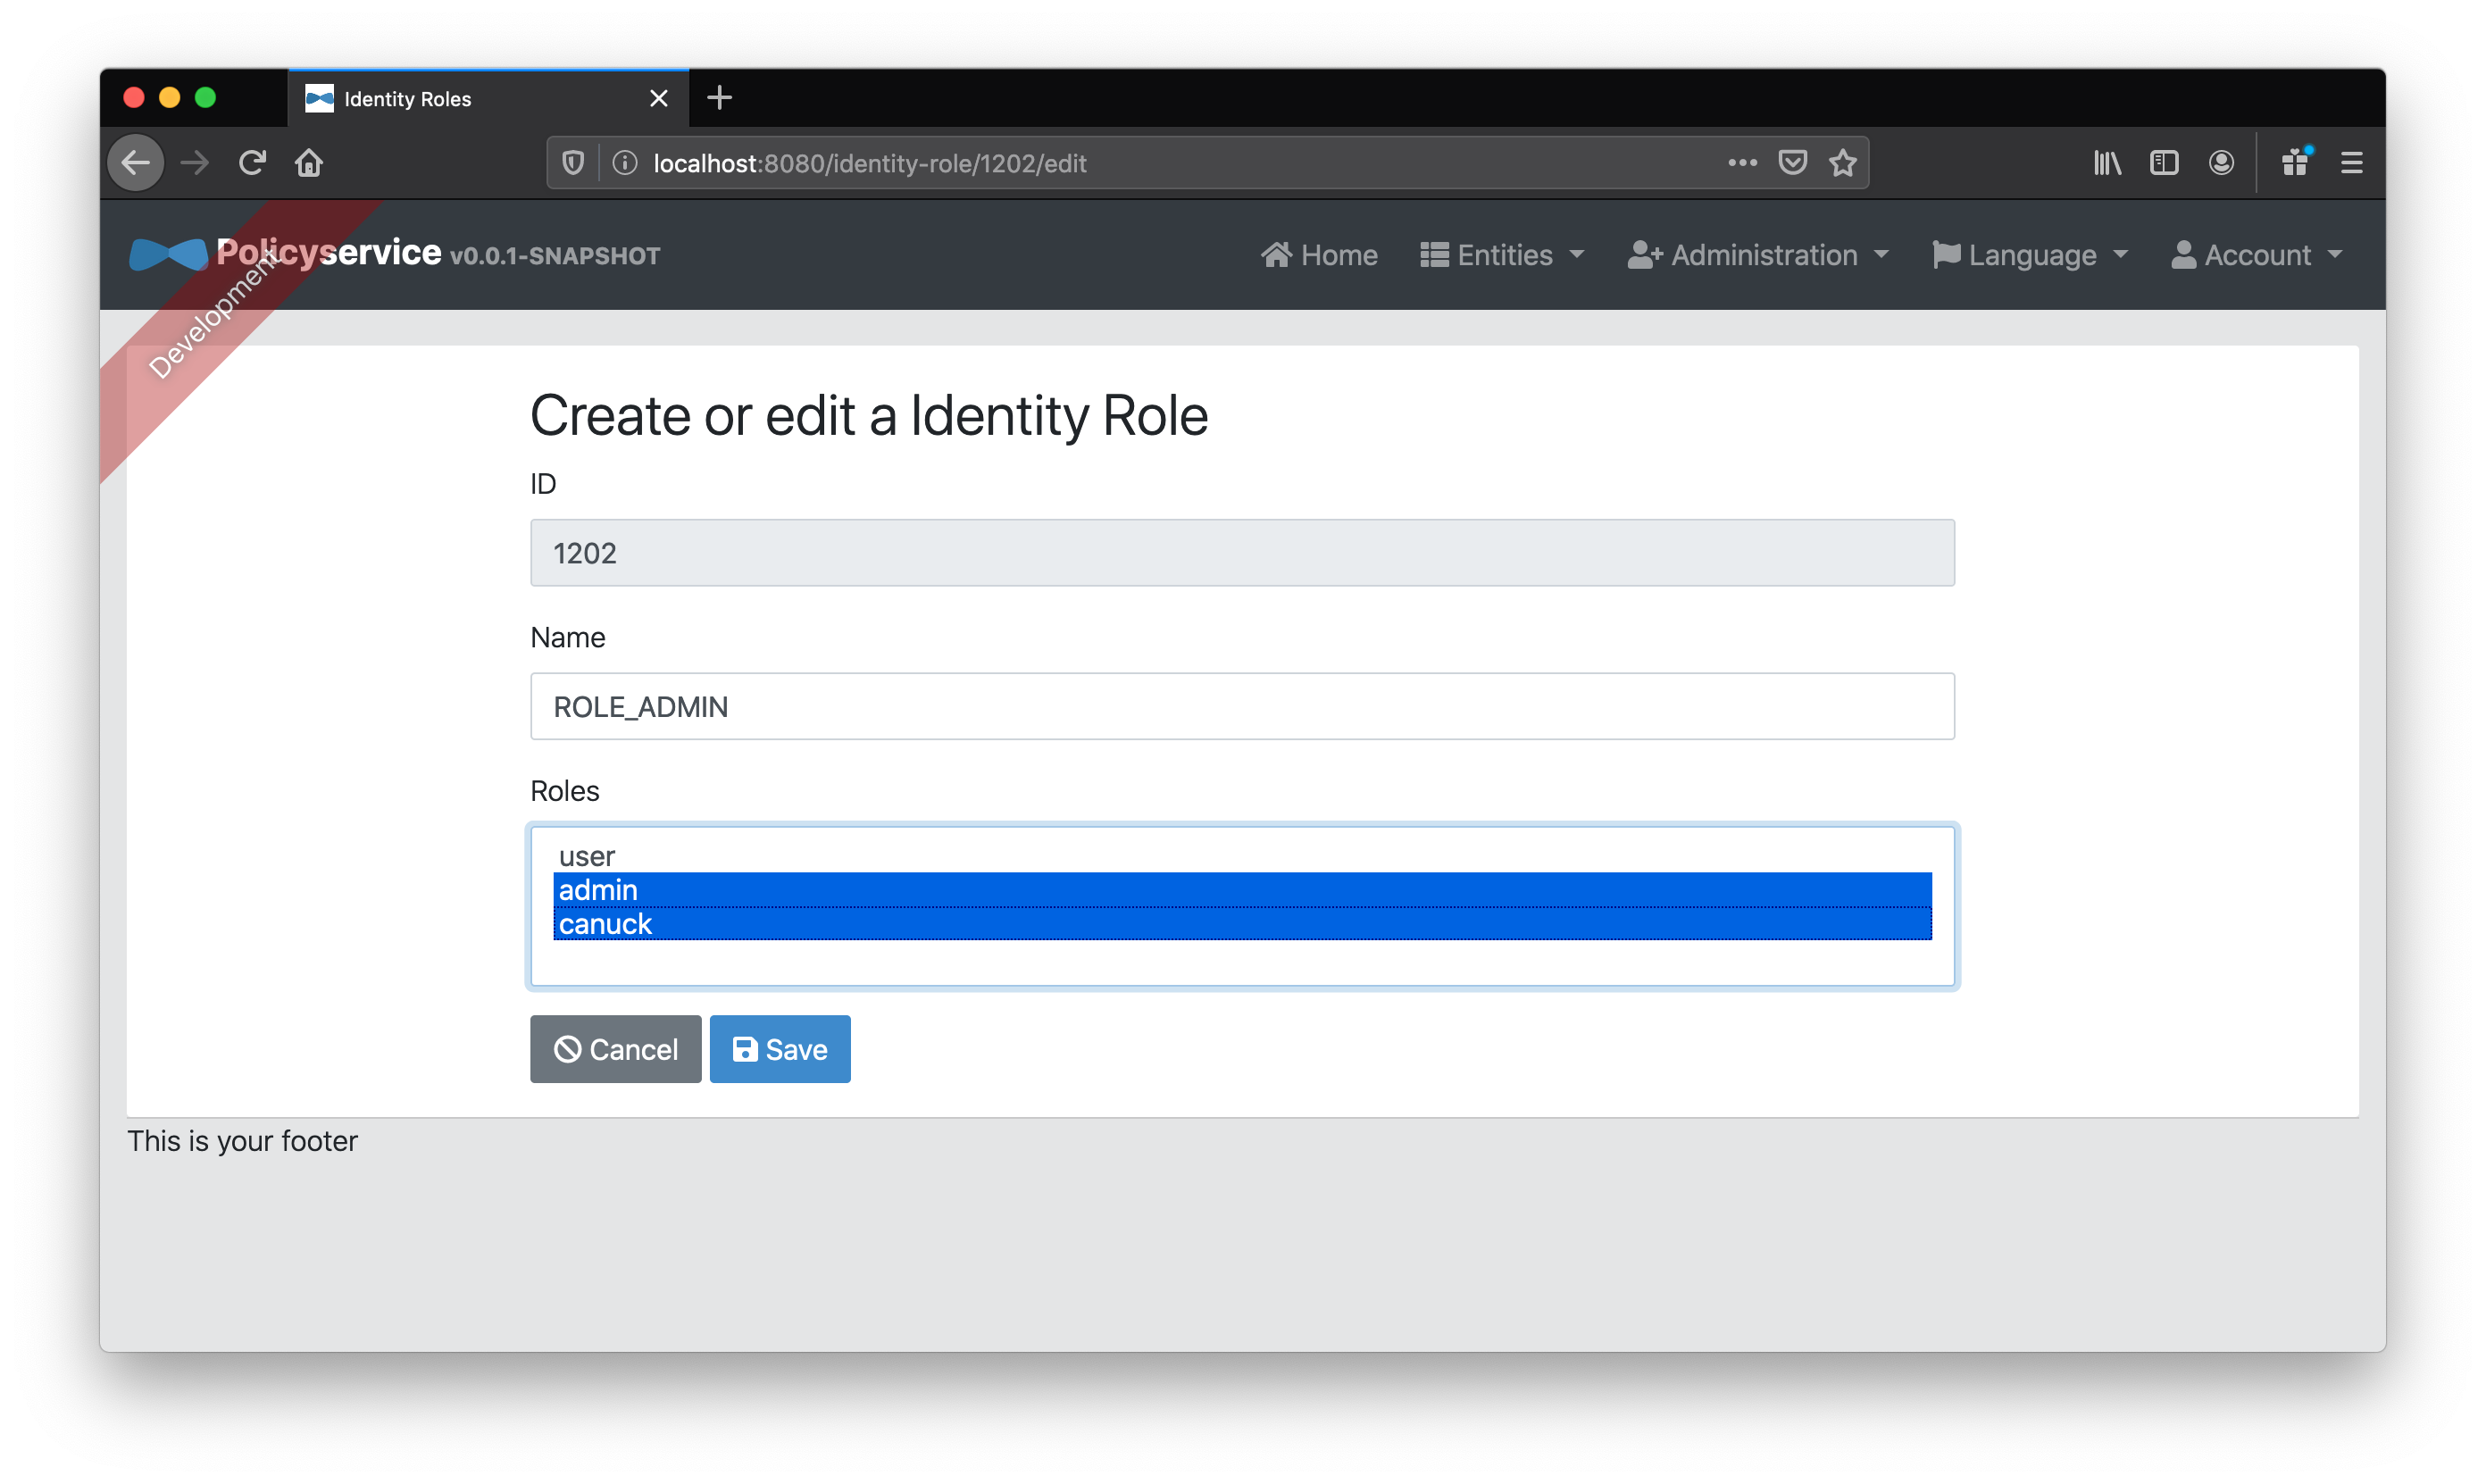 Add identity role mapping to canuck